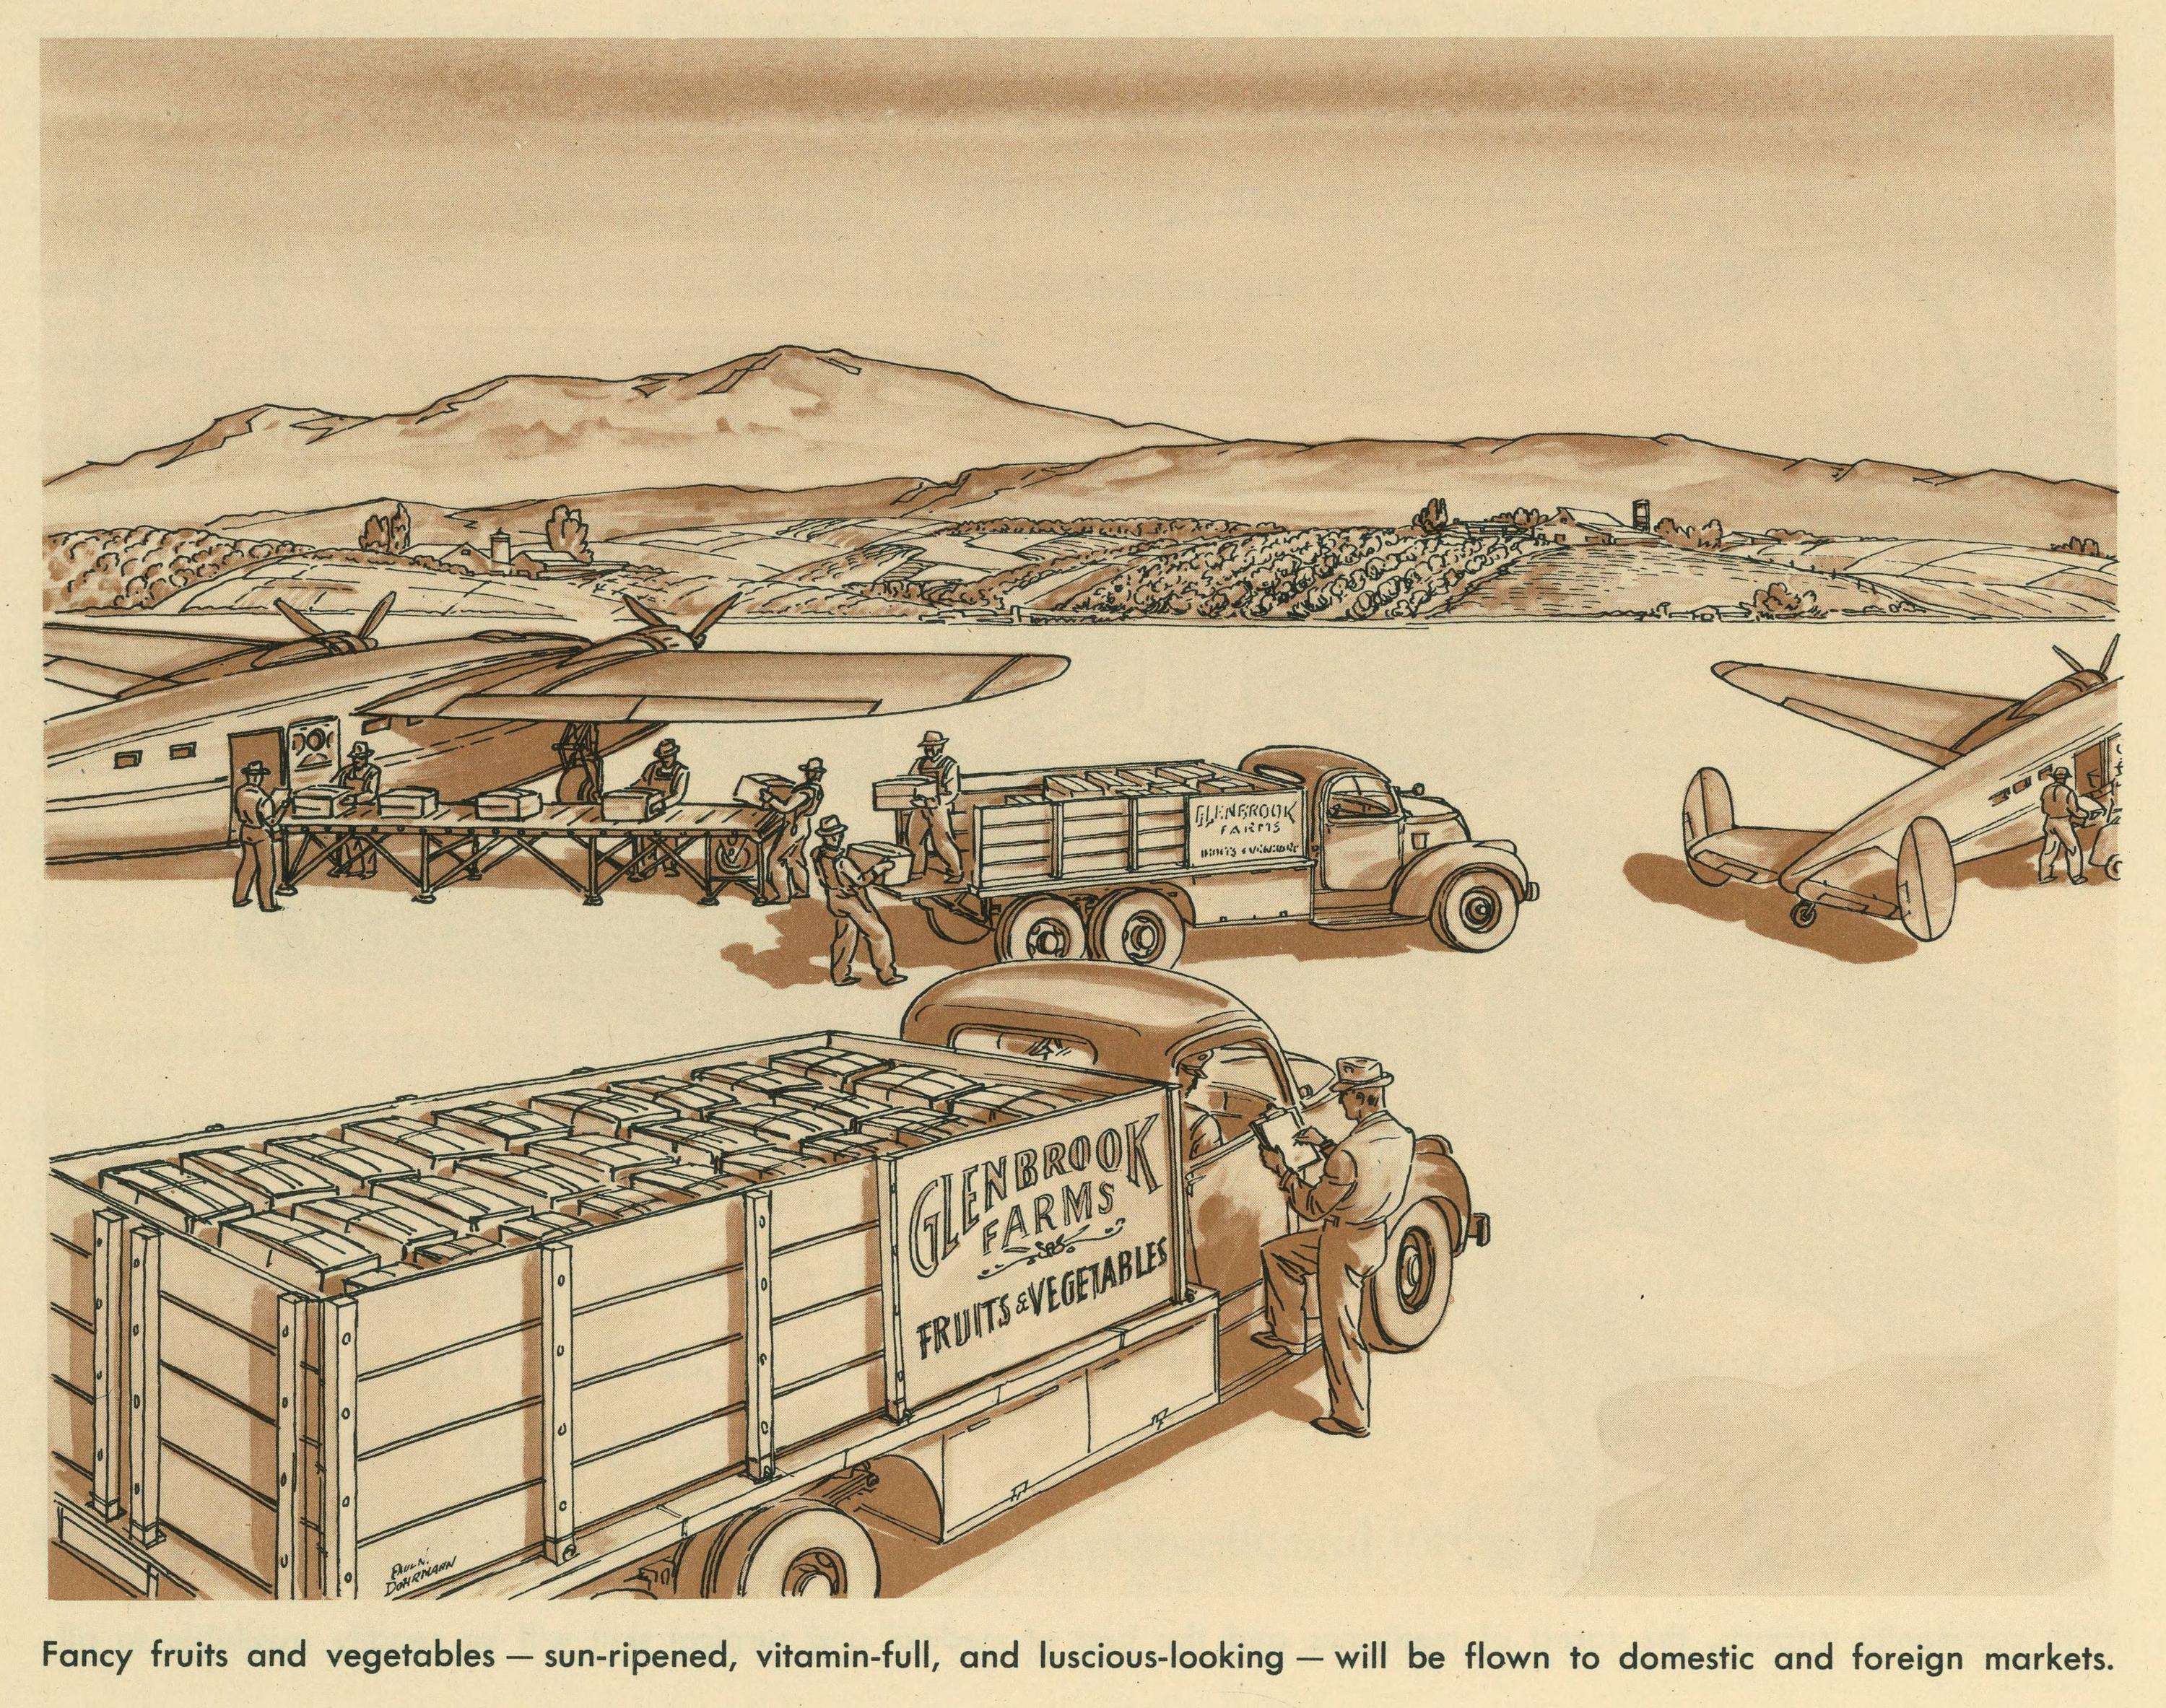 The Airport... Its Importance to your Community : Prepared in the Interest of Schwanerville, For the Coming Age of Flight / By the Aviation Department, Shell Oil Company Incorporated. — Sacramento, 1944